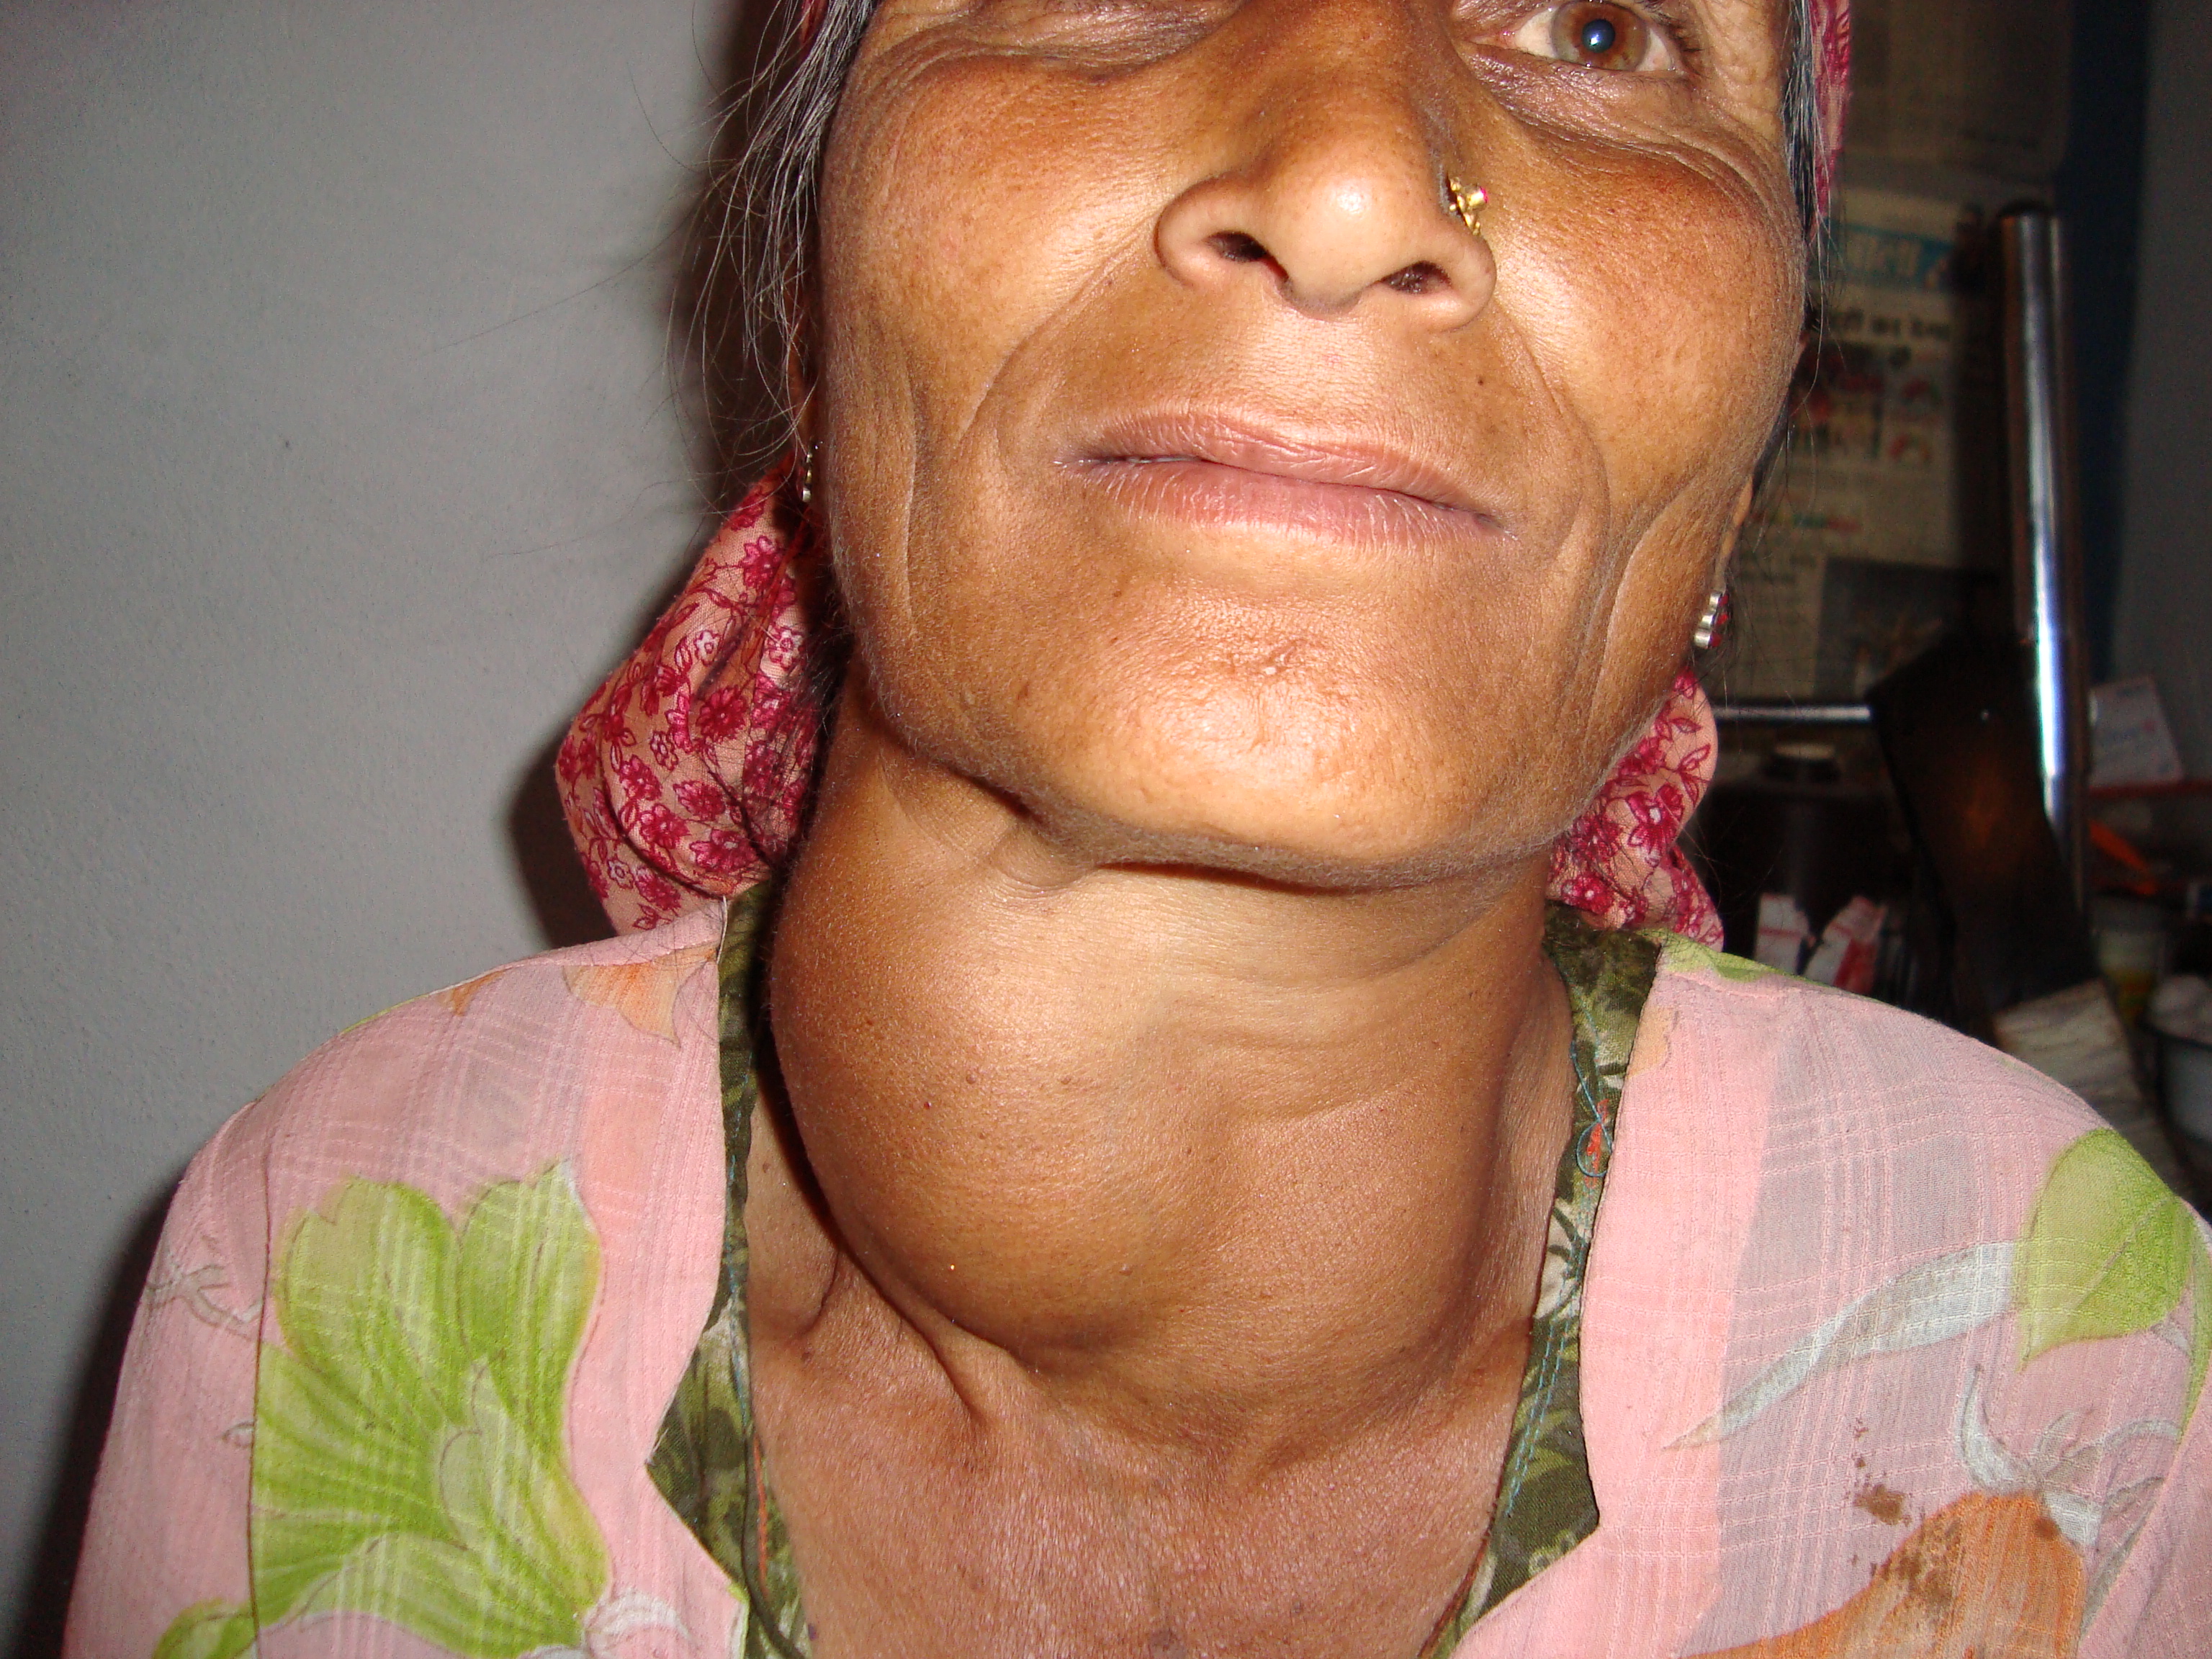 Picture of a woman with a goiter approximately the size of a grapefruit in the neck/thyroid area.